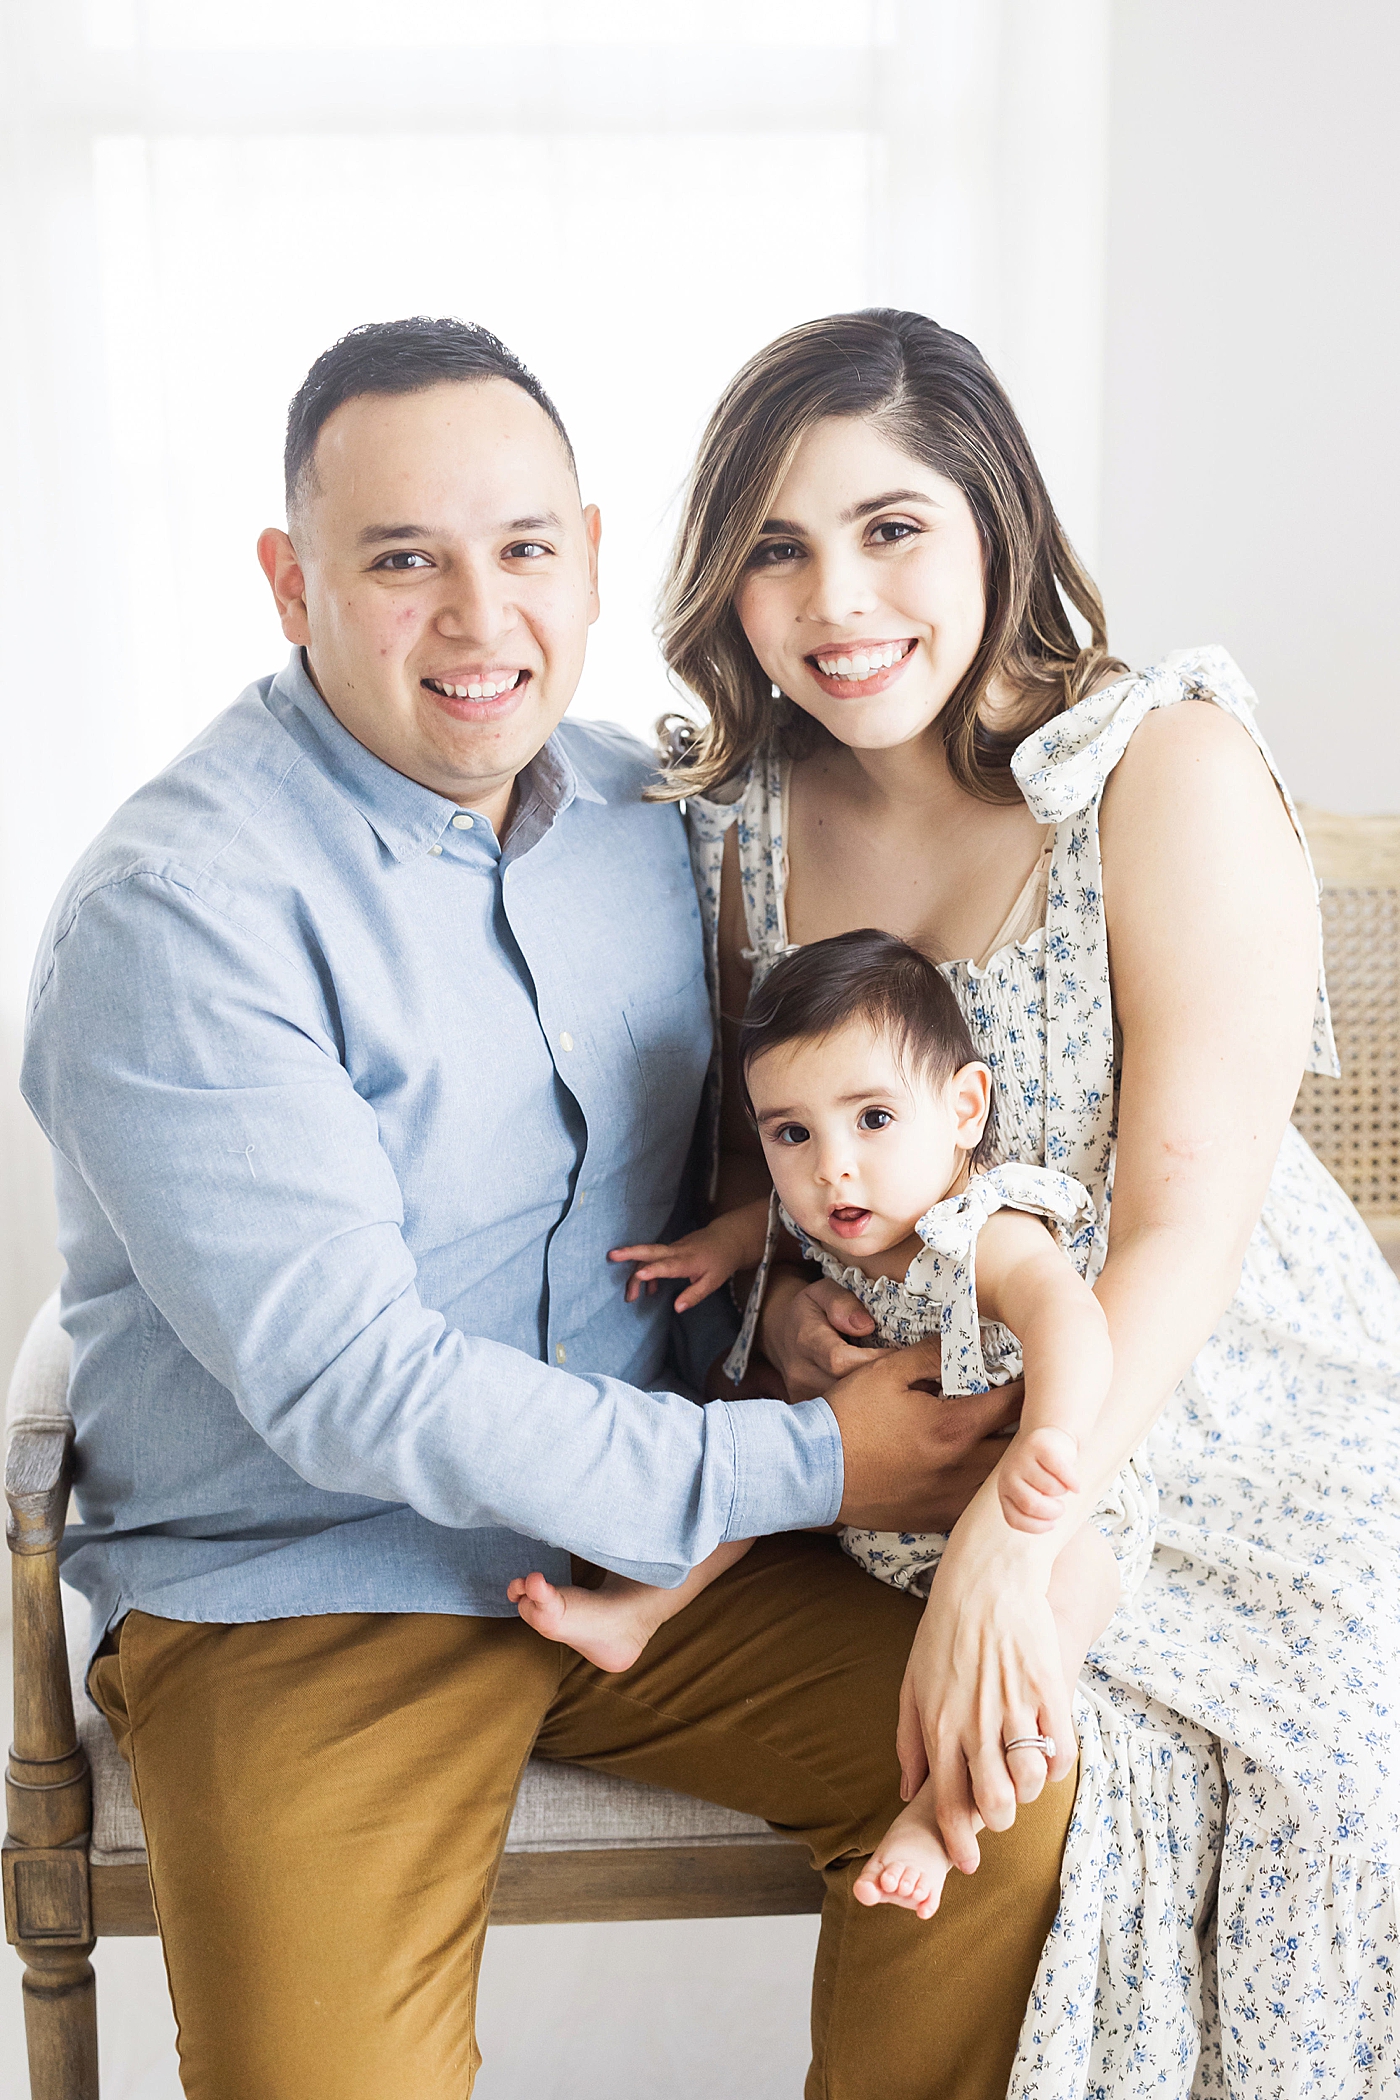 Family portrait in studio. Photo by Fresh Light Photography.